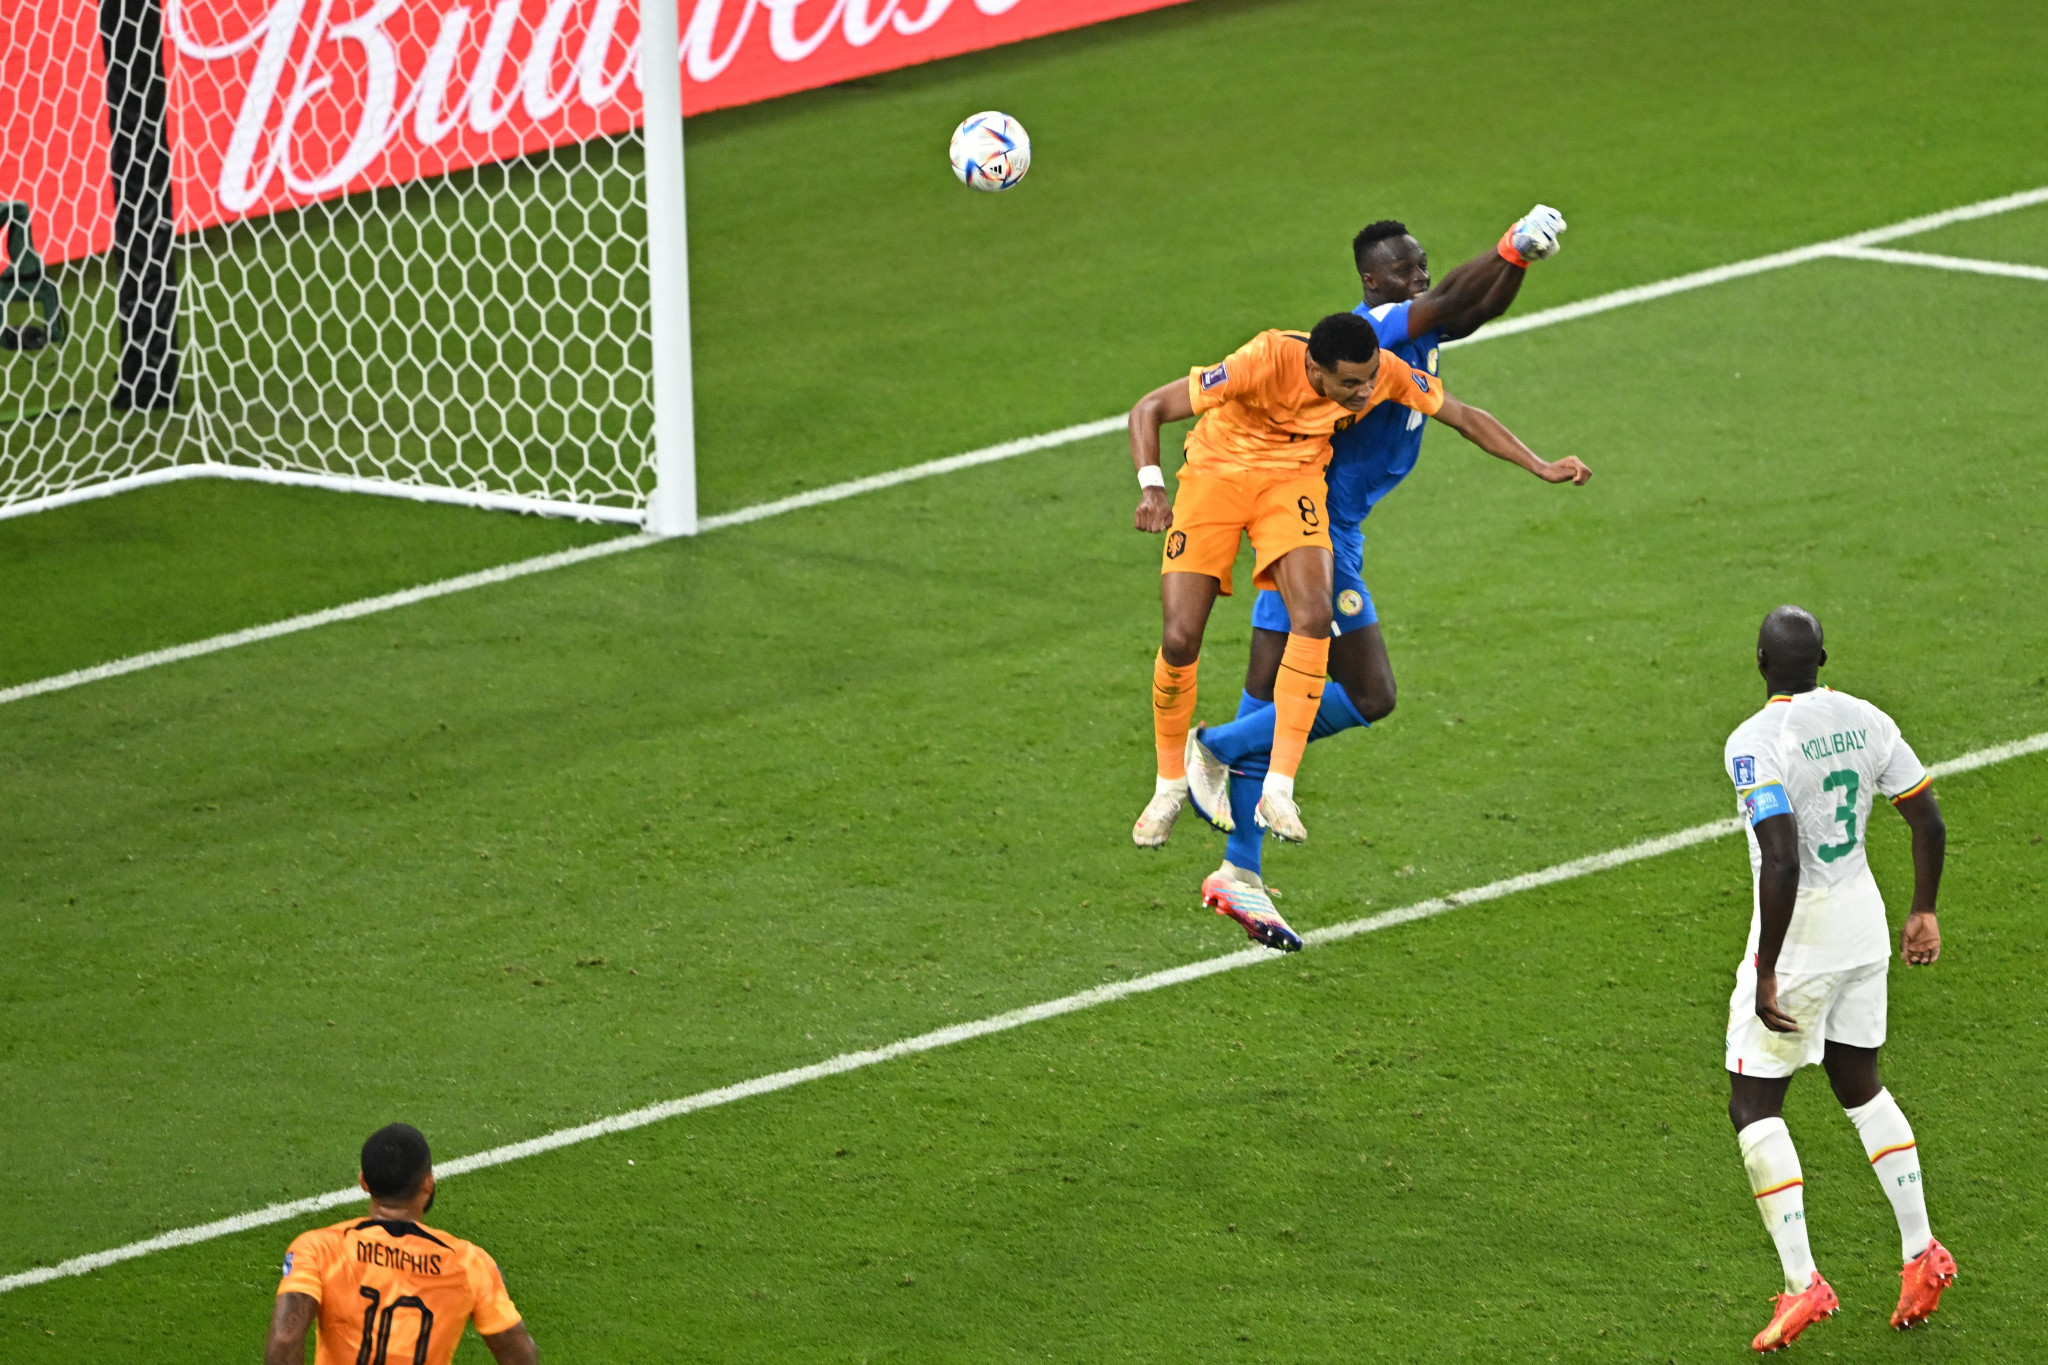 Cody Gakpo beat Senegalese goalkeeper Edouard Mendy to the ball to draw first blood for the Dutch after 84 minutes ©Getty Images